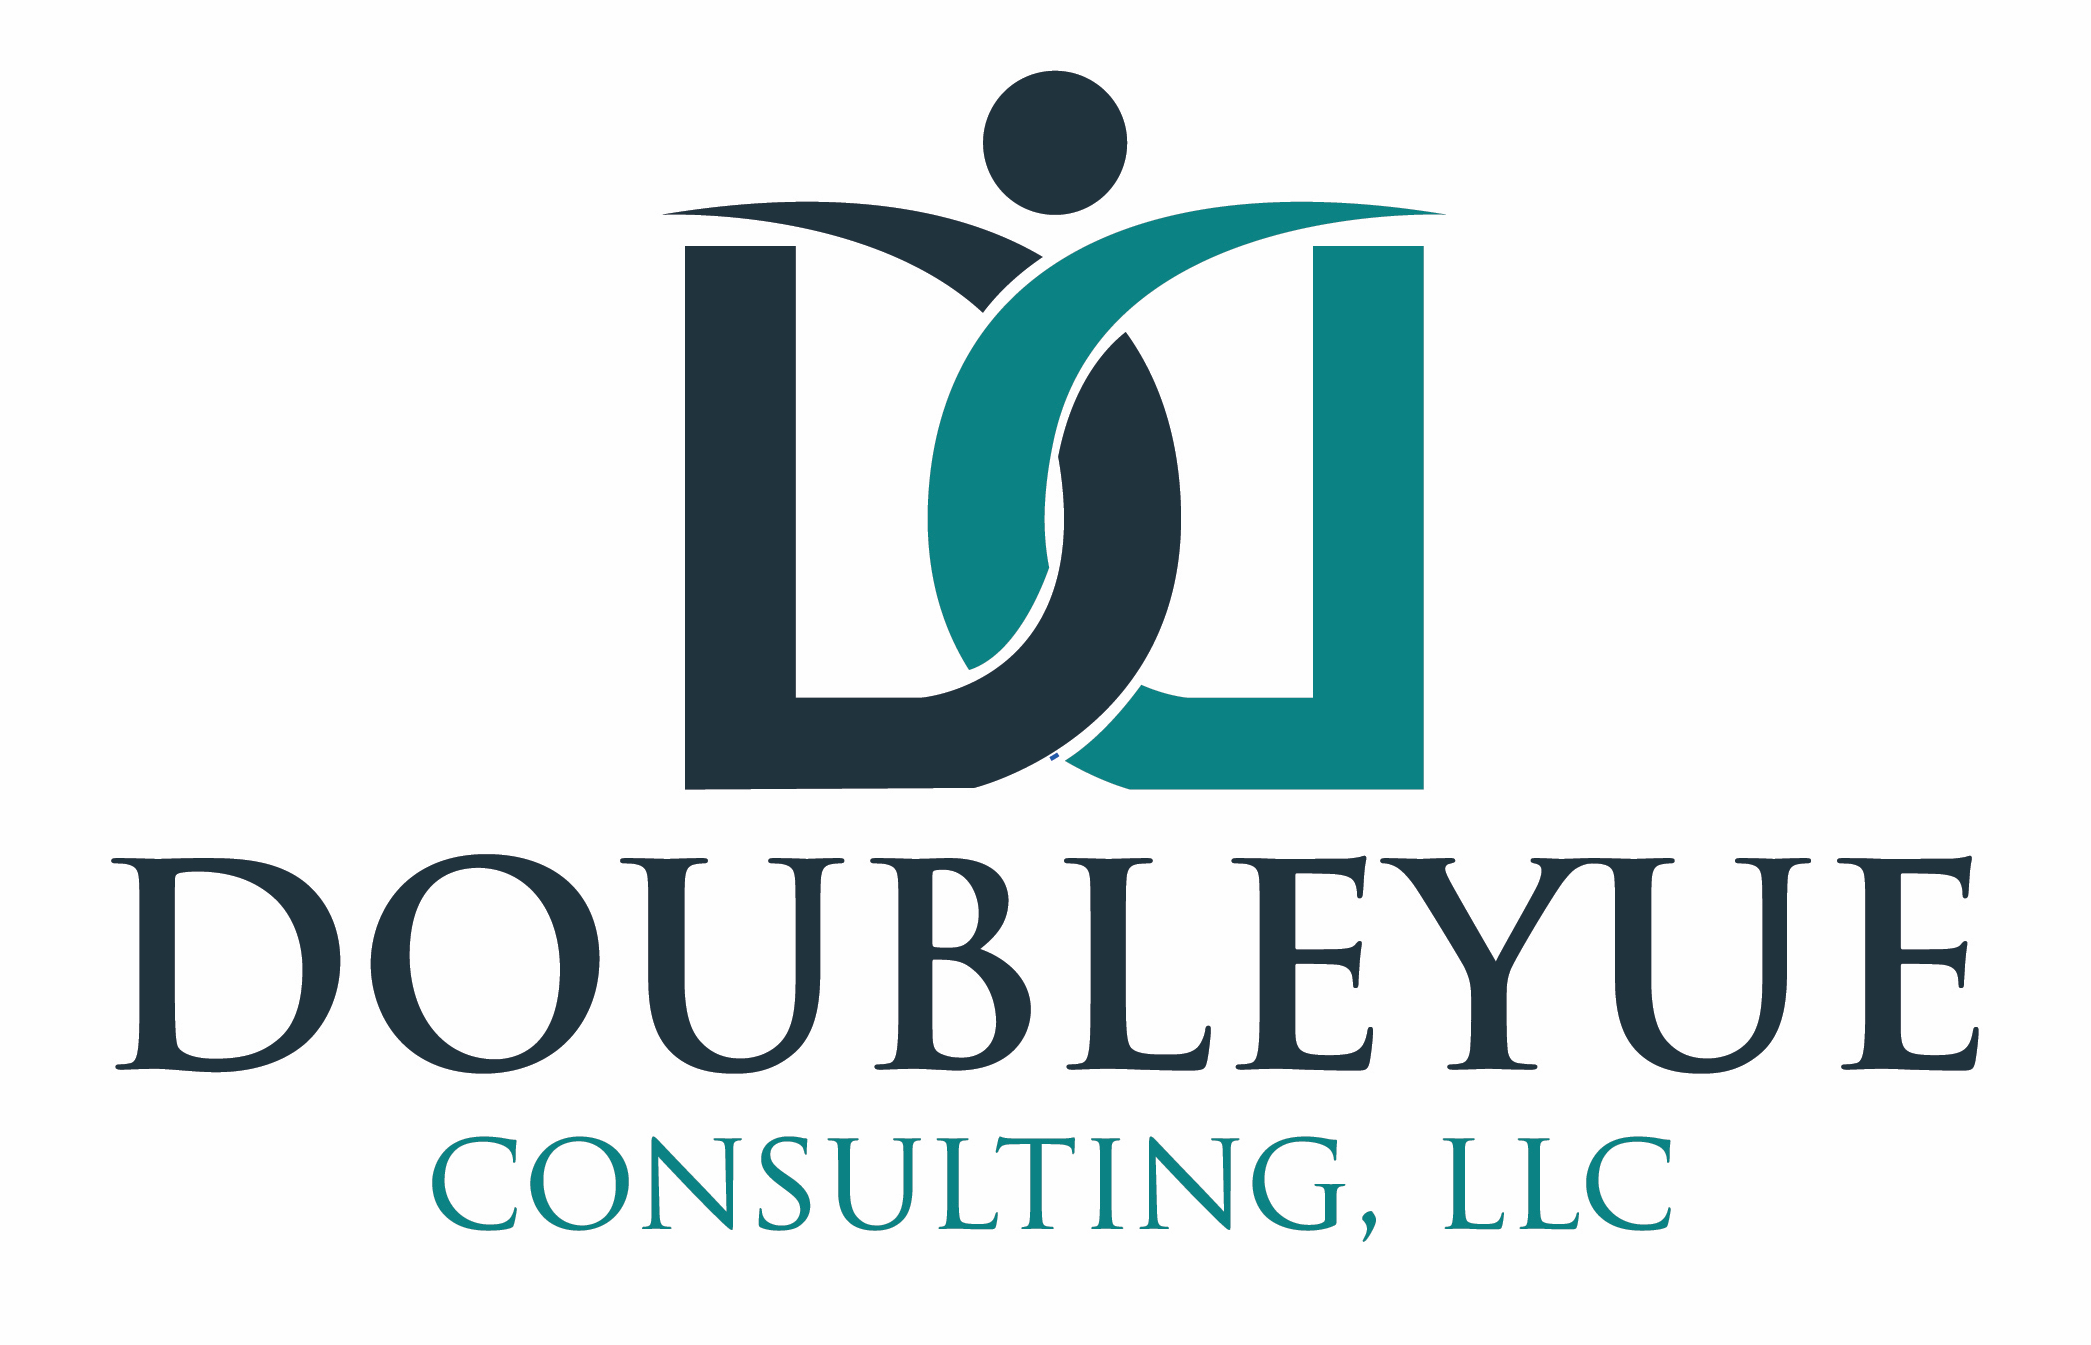 Doubleyue Consulting